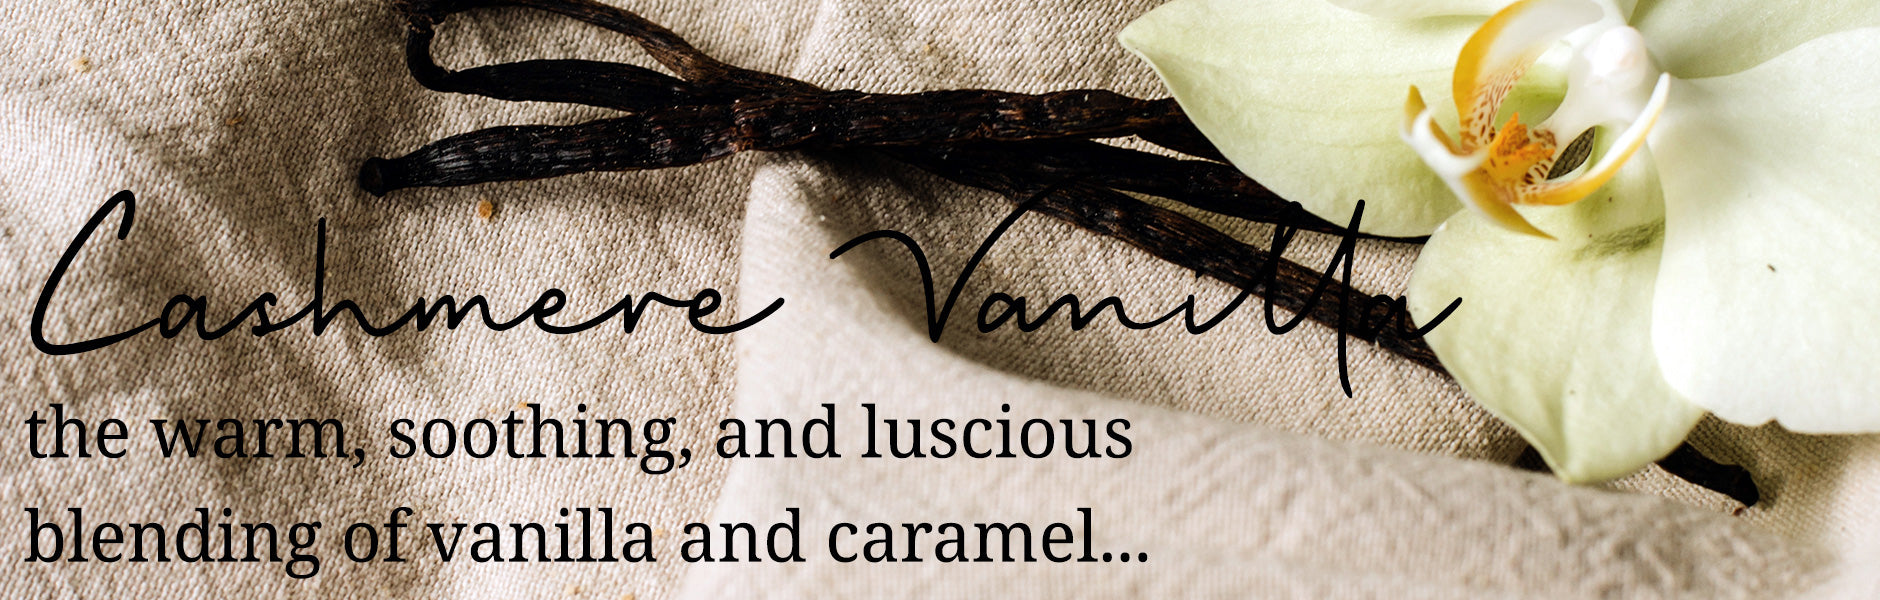 Cashmere Vanilla: the warm, soothing, and luscious blending of vanilla and caramel...